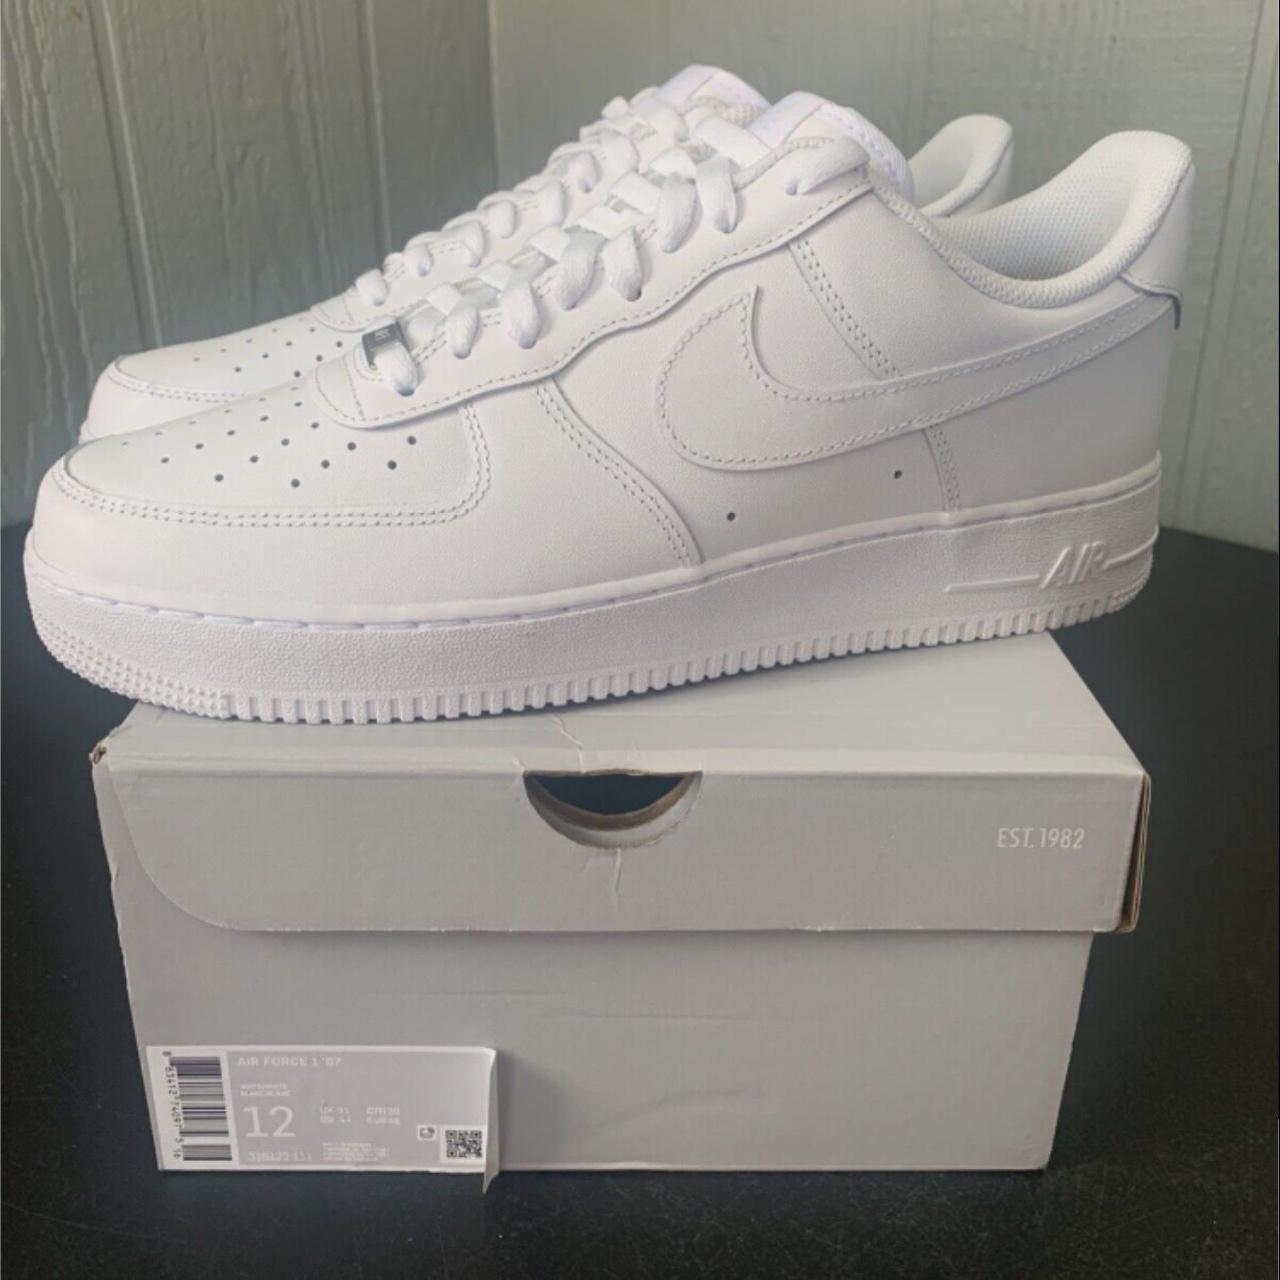 Airforce 1 Brand new Sizes 4y-13 available The one... - Depop